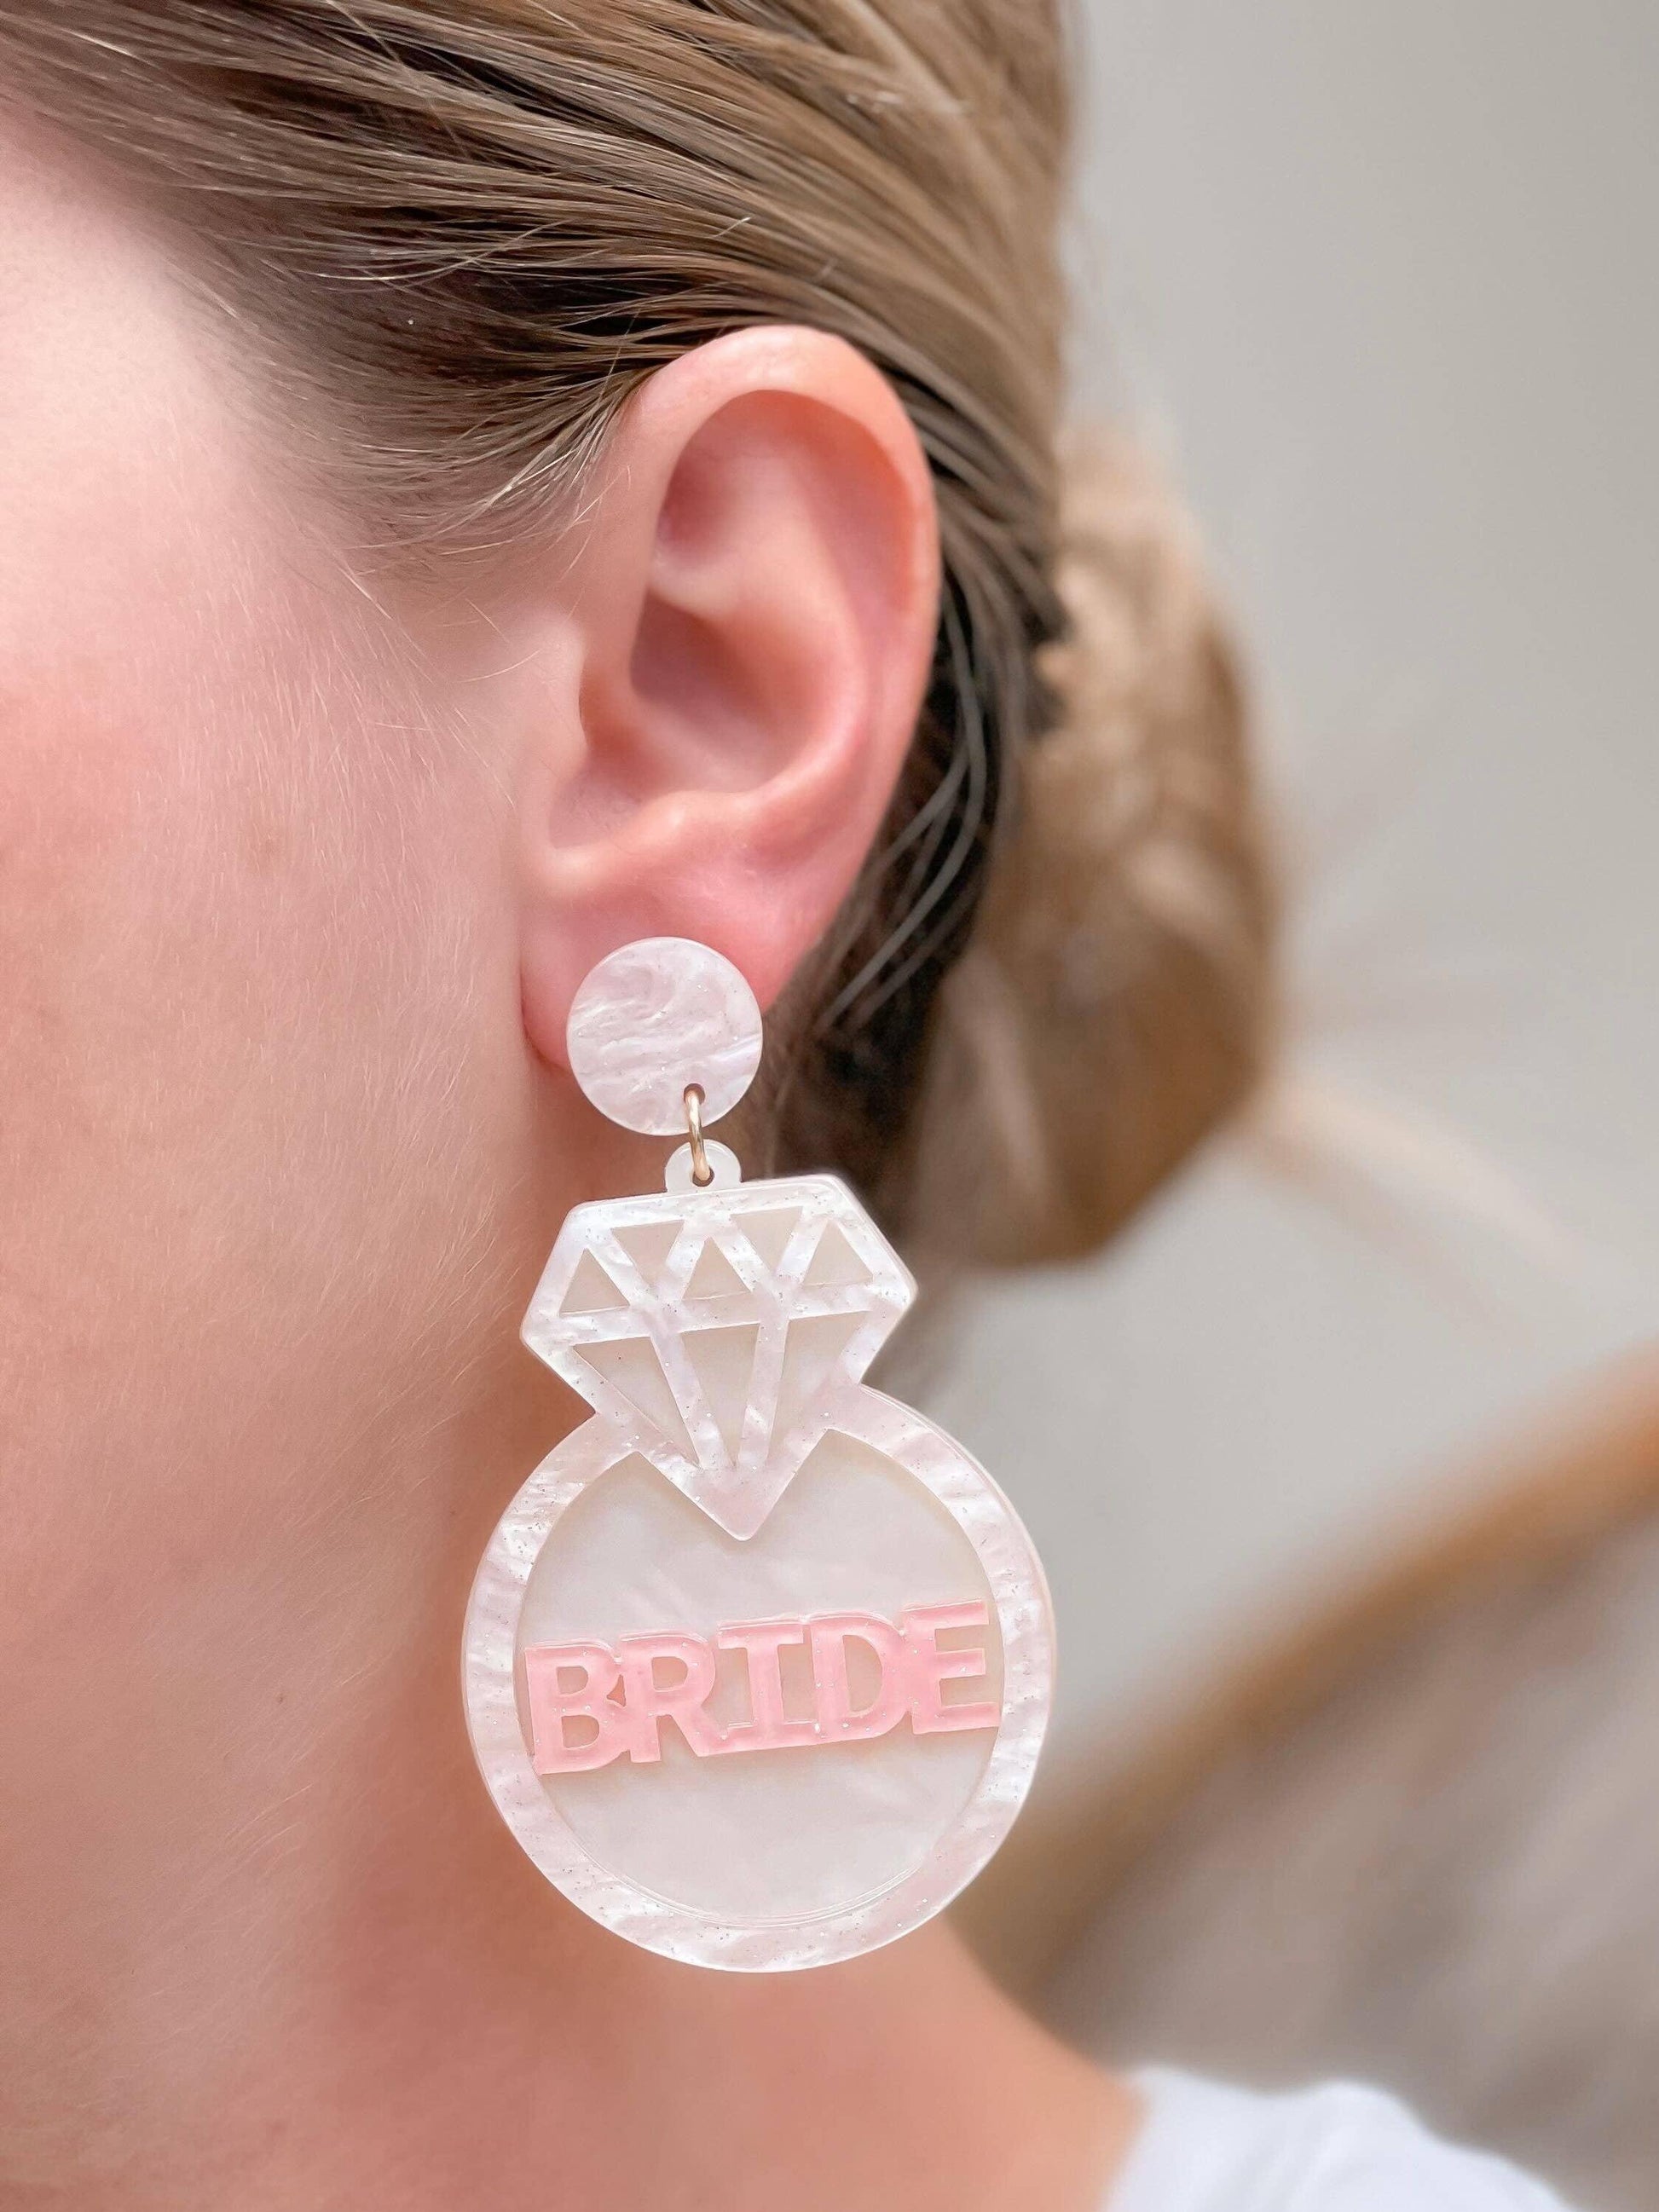 Acrylic 'Bride' Ring Dangle Earrings - The Salty Mare